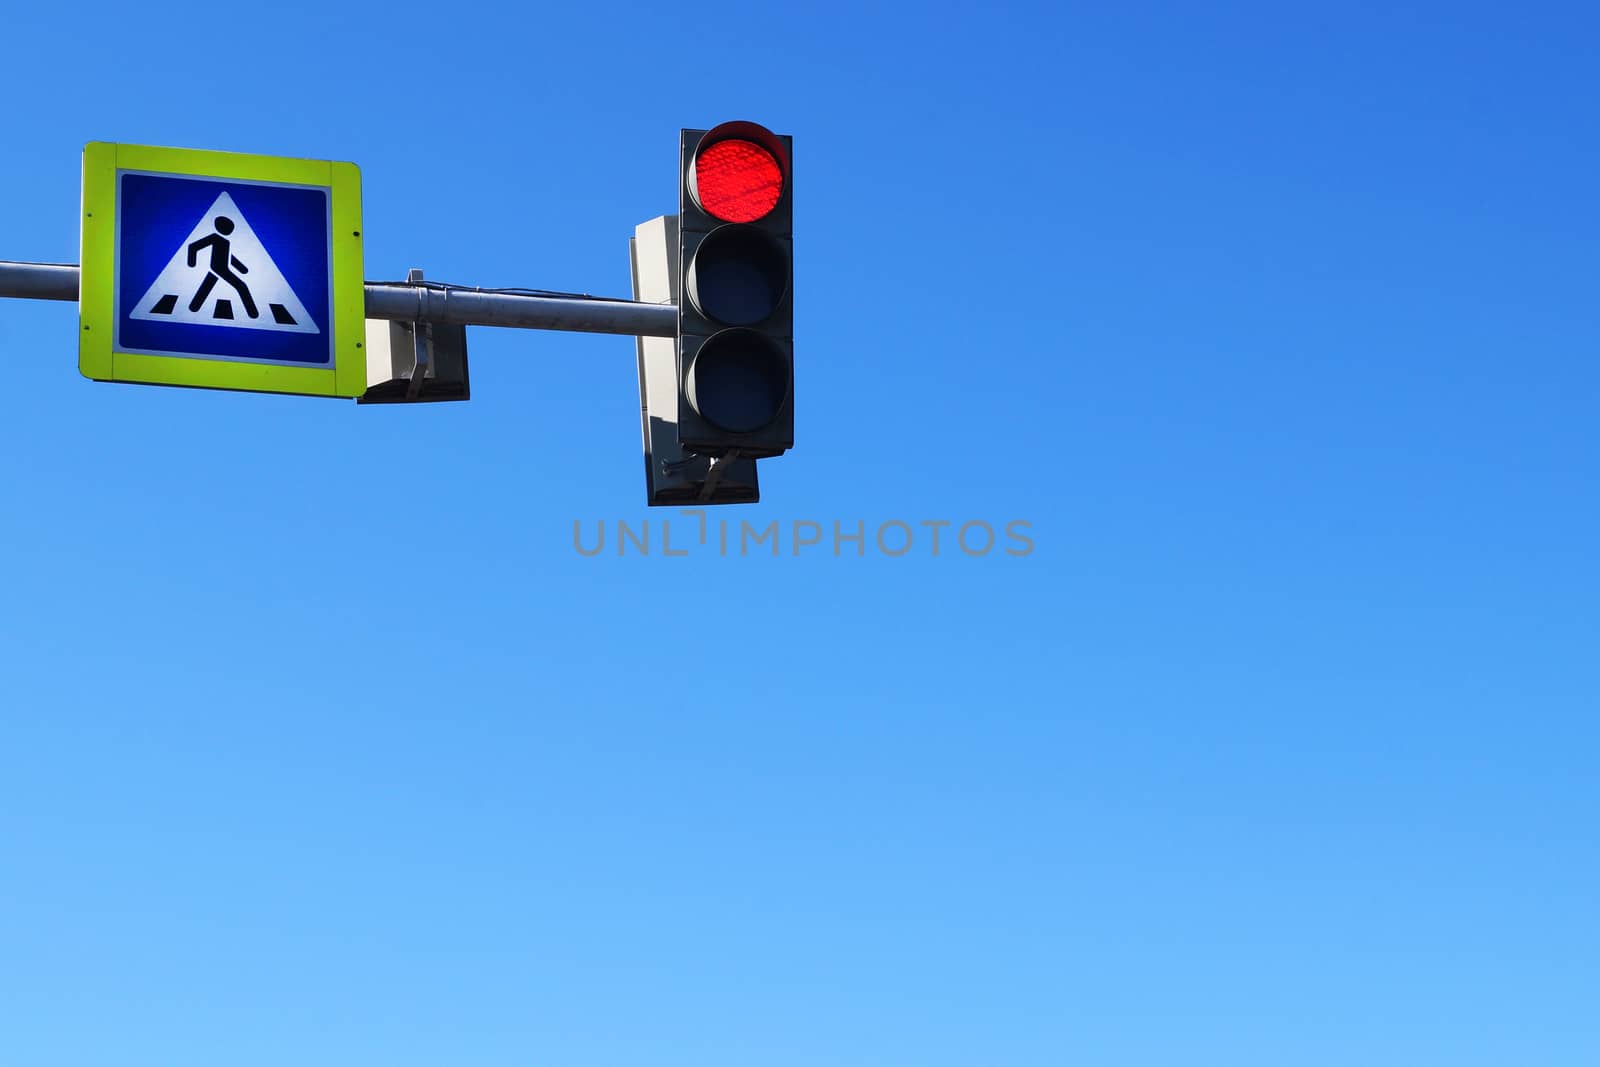 crosswalk sign and red traffic light on blue sky background, copy space.